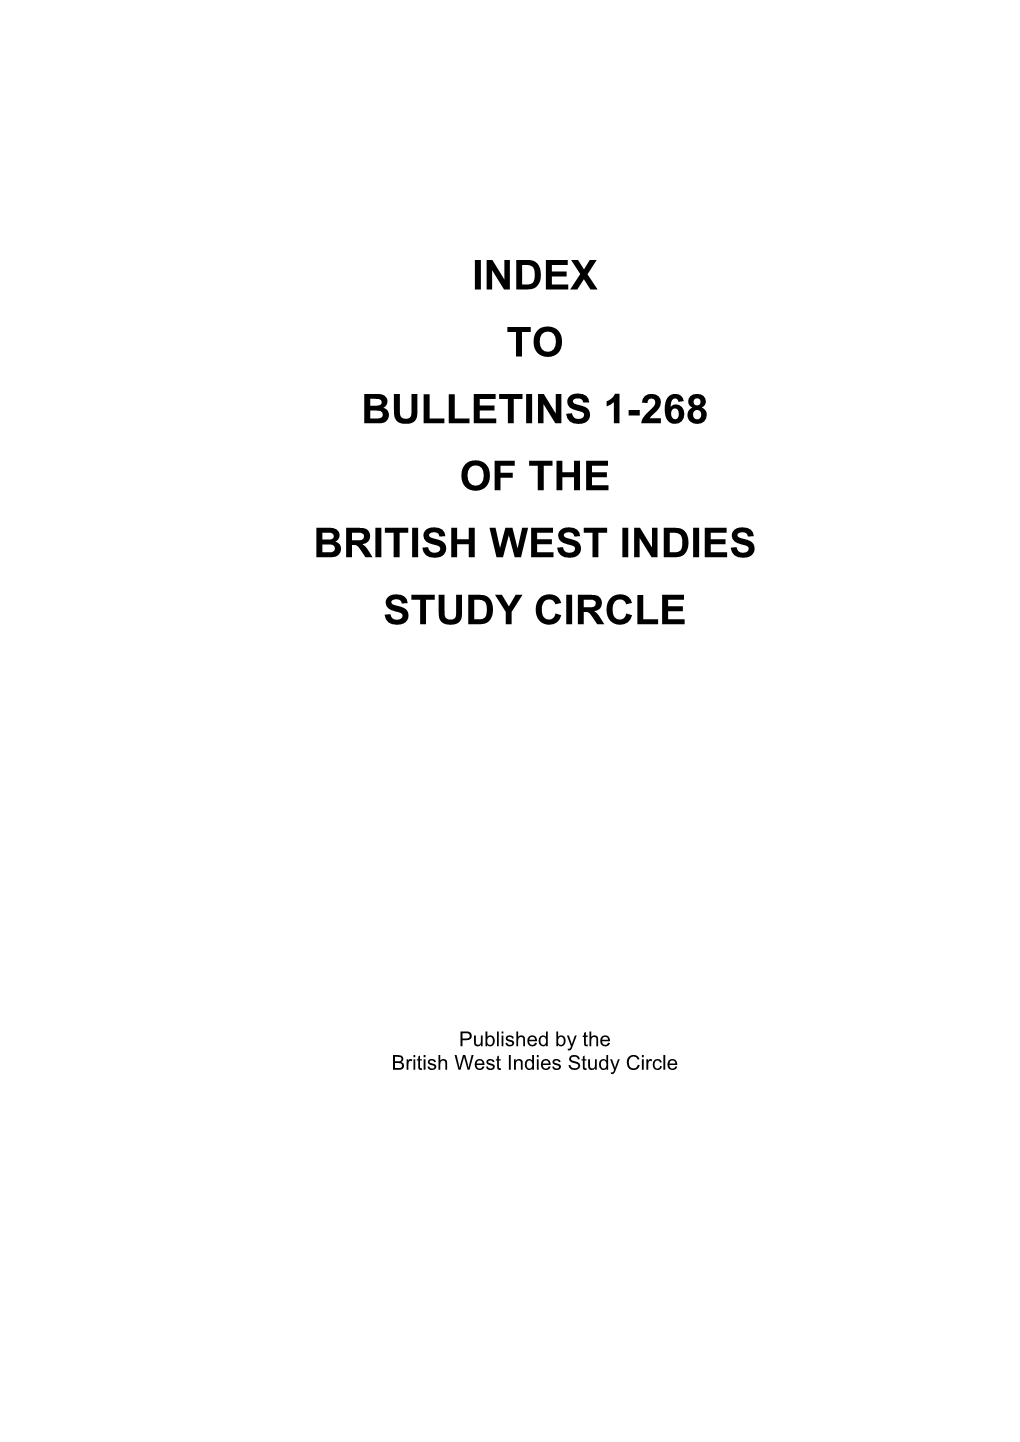 Index to Bulletins 1-268 of the British West Indies Study